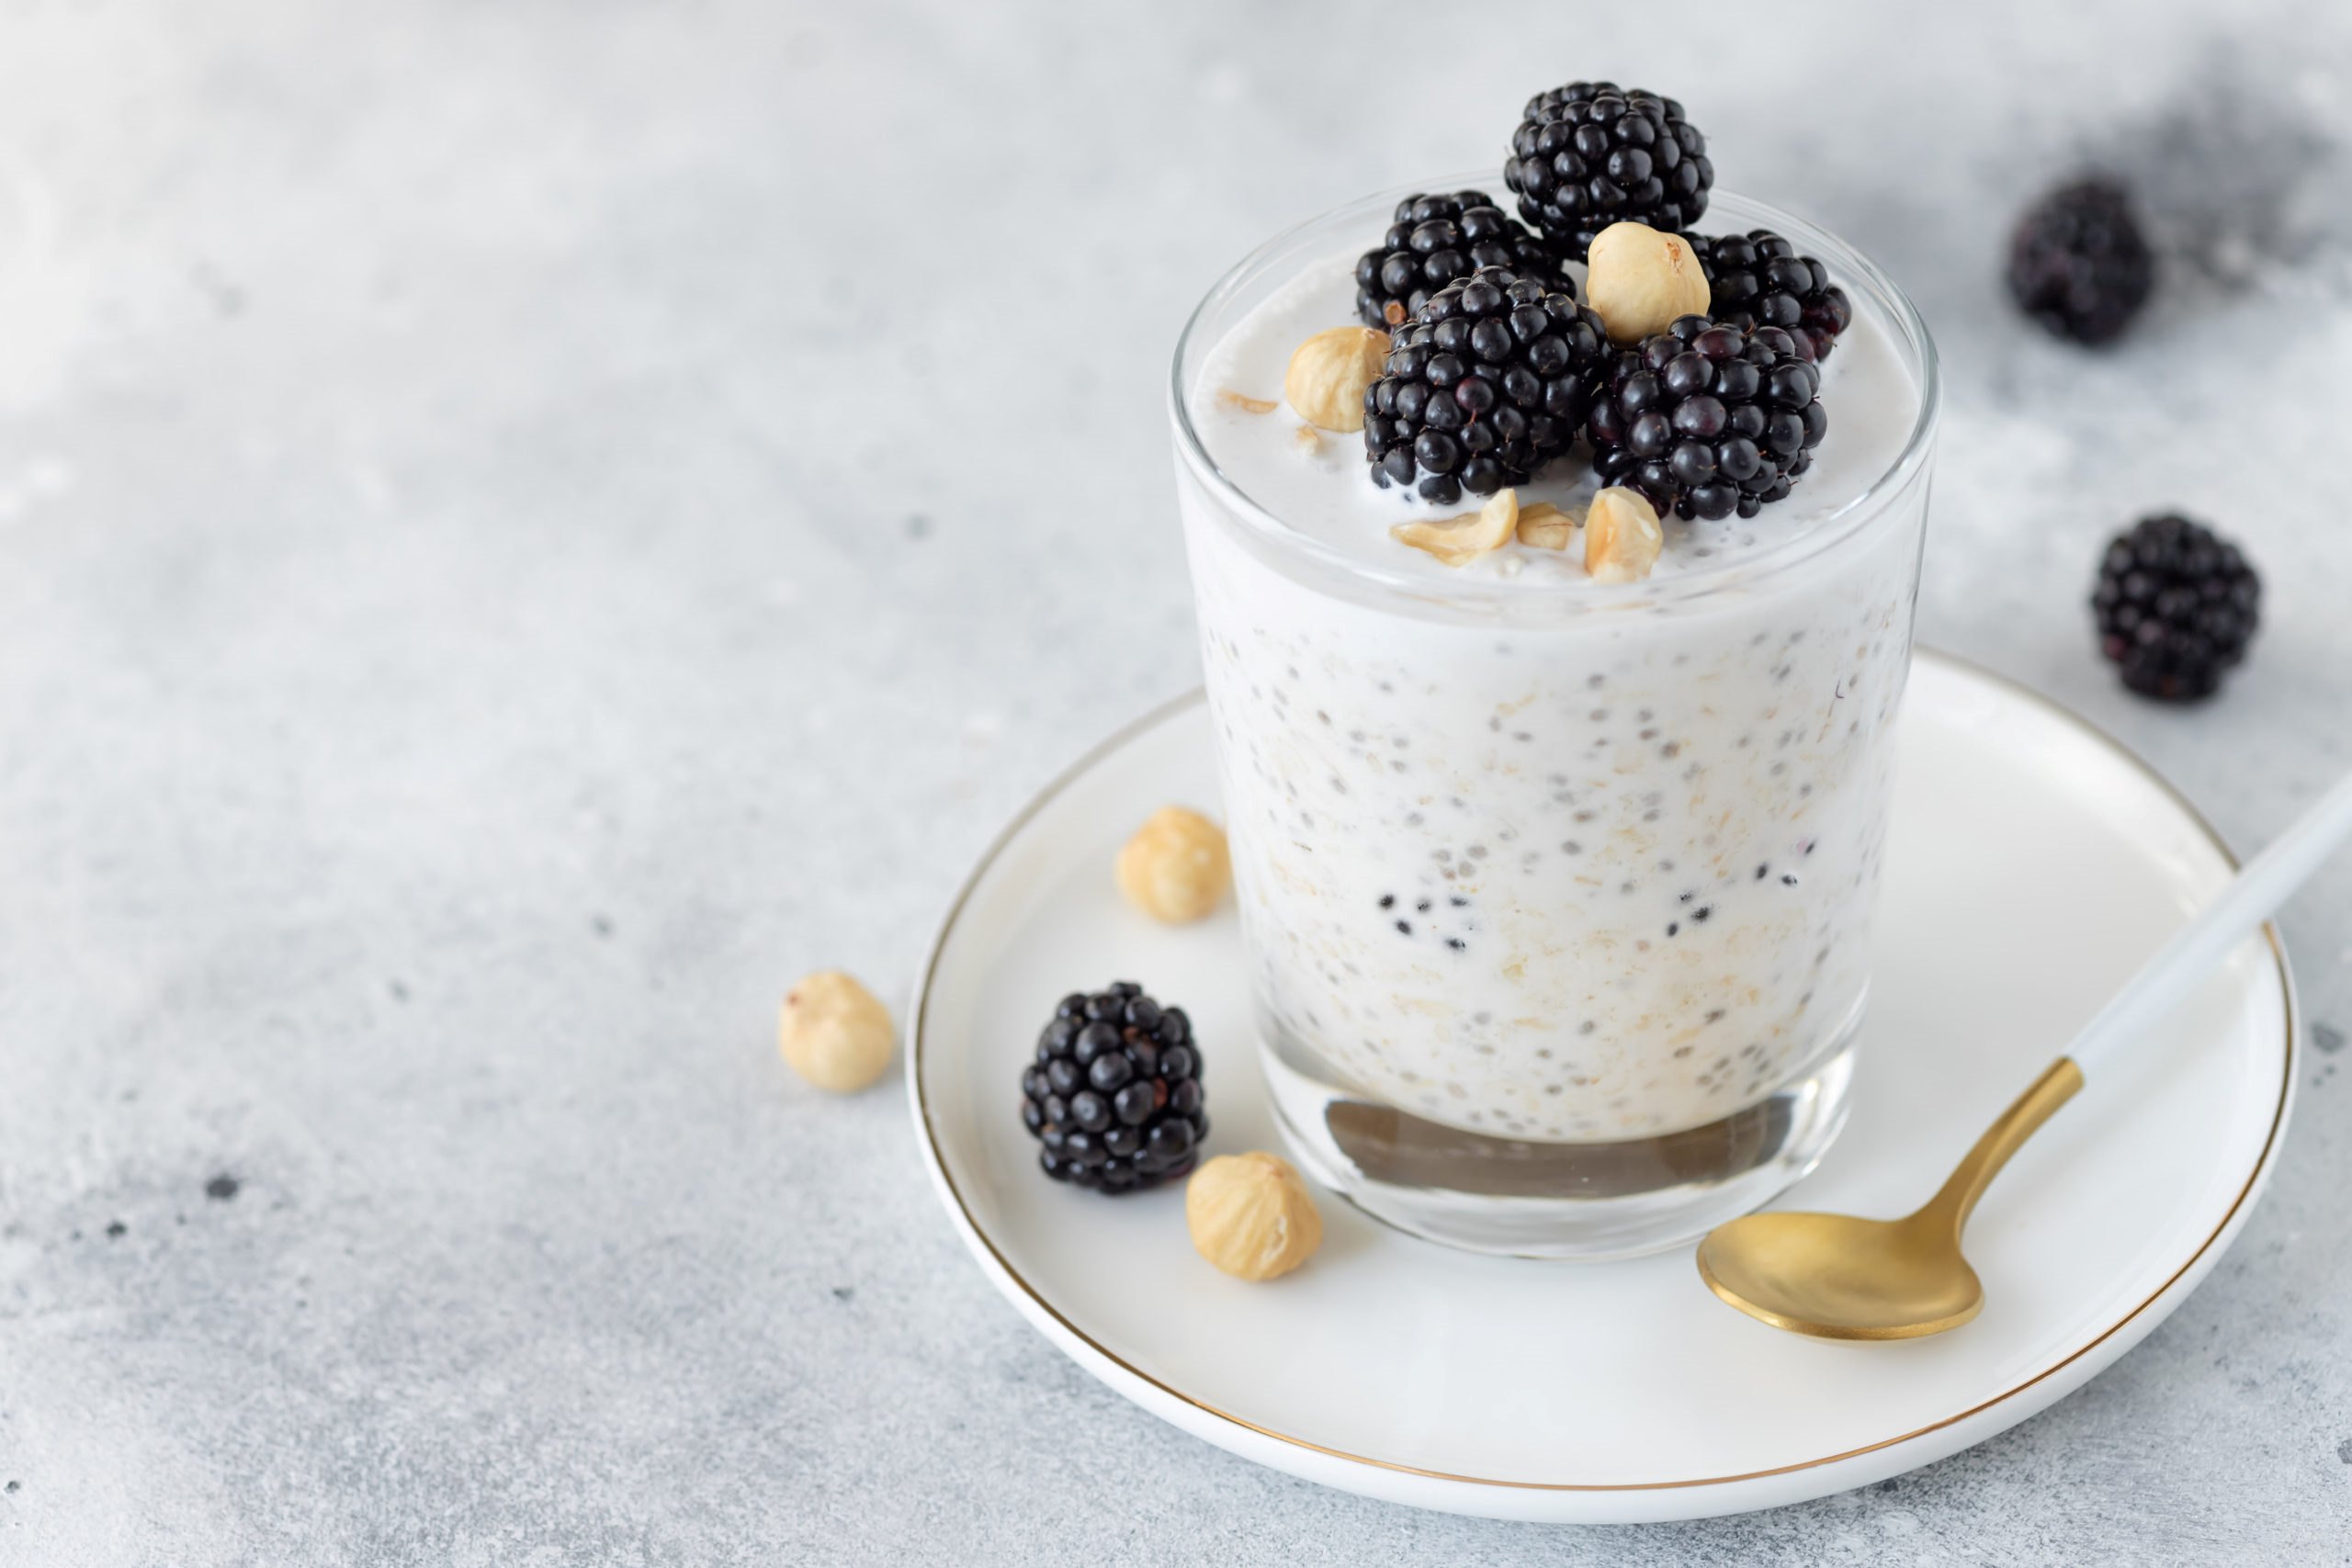 How To Make Overnight Oats With Chia Seeds